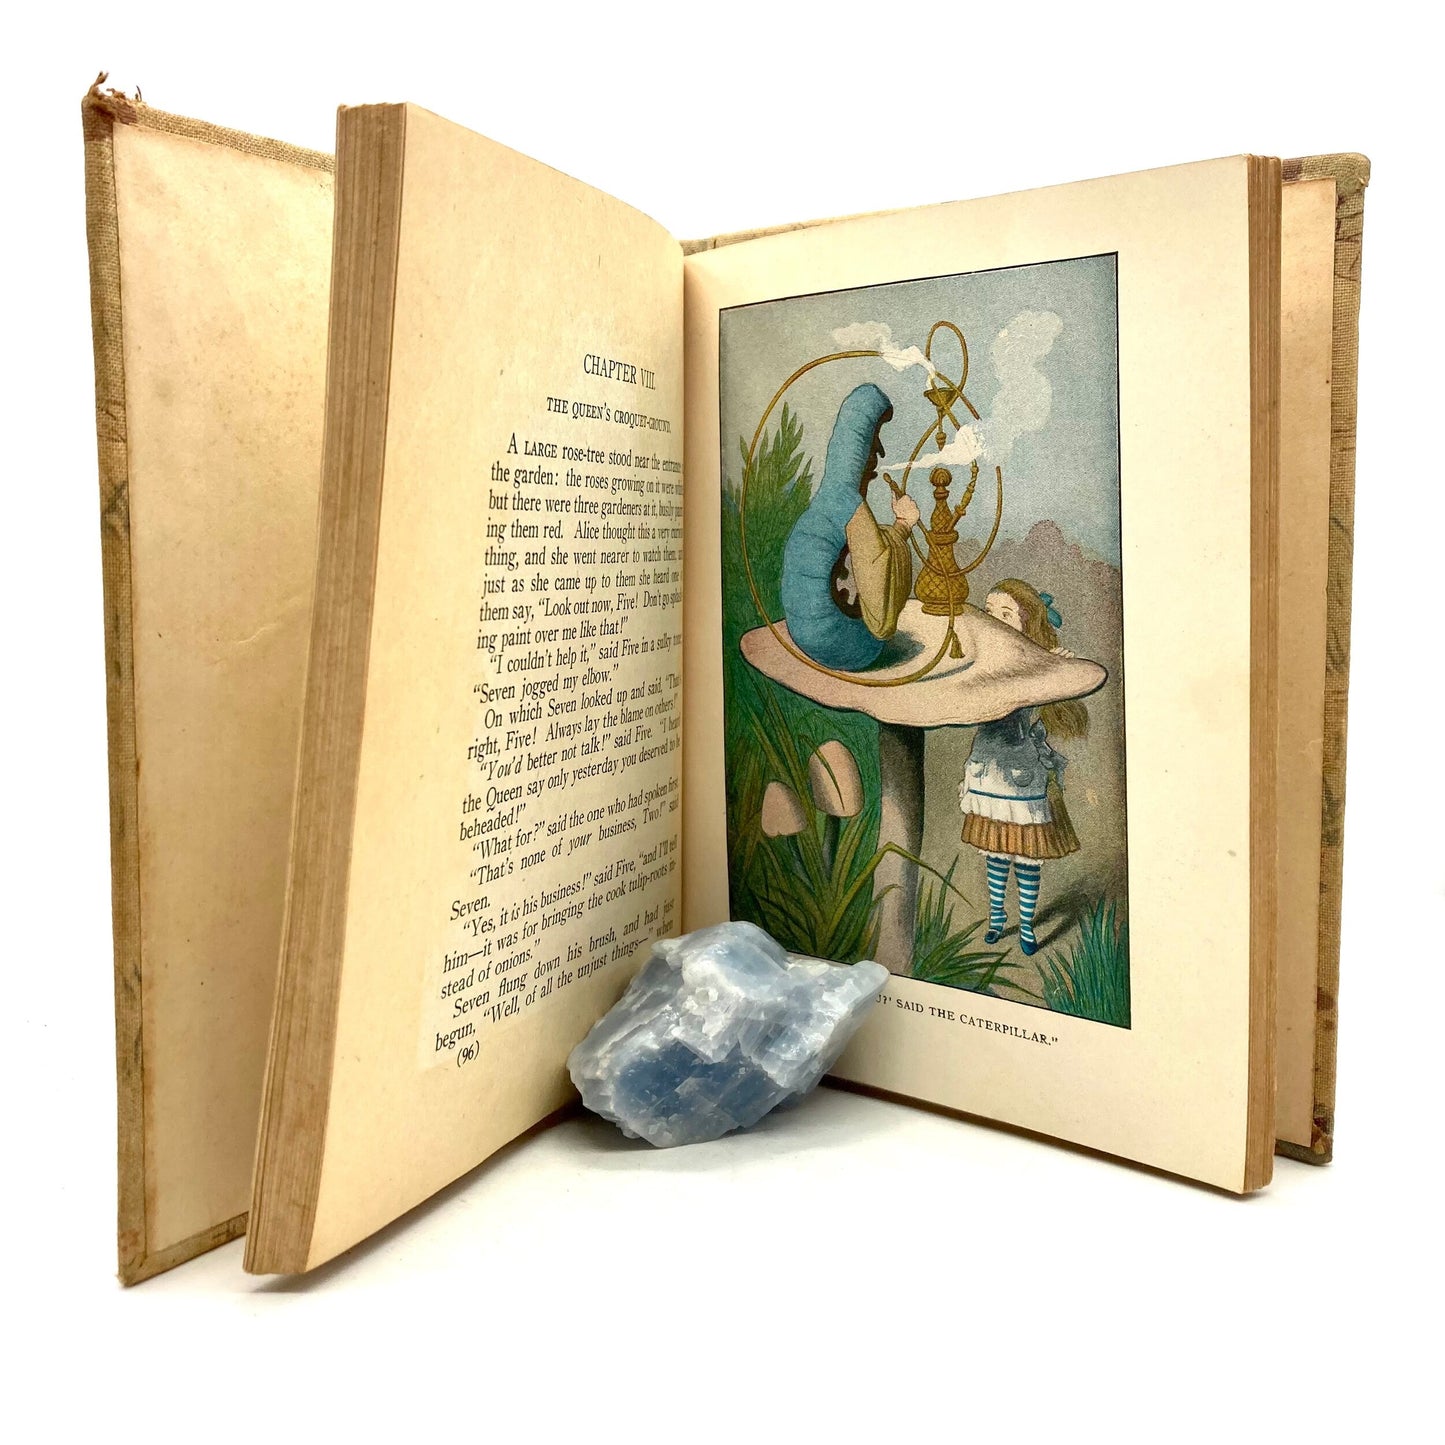 CARROLL, Lewis "Alice in Wonderland"/"Through the Looking Glass" [Henry Altemus, 1897/1900] - Buzz Bookstore